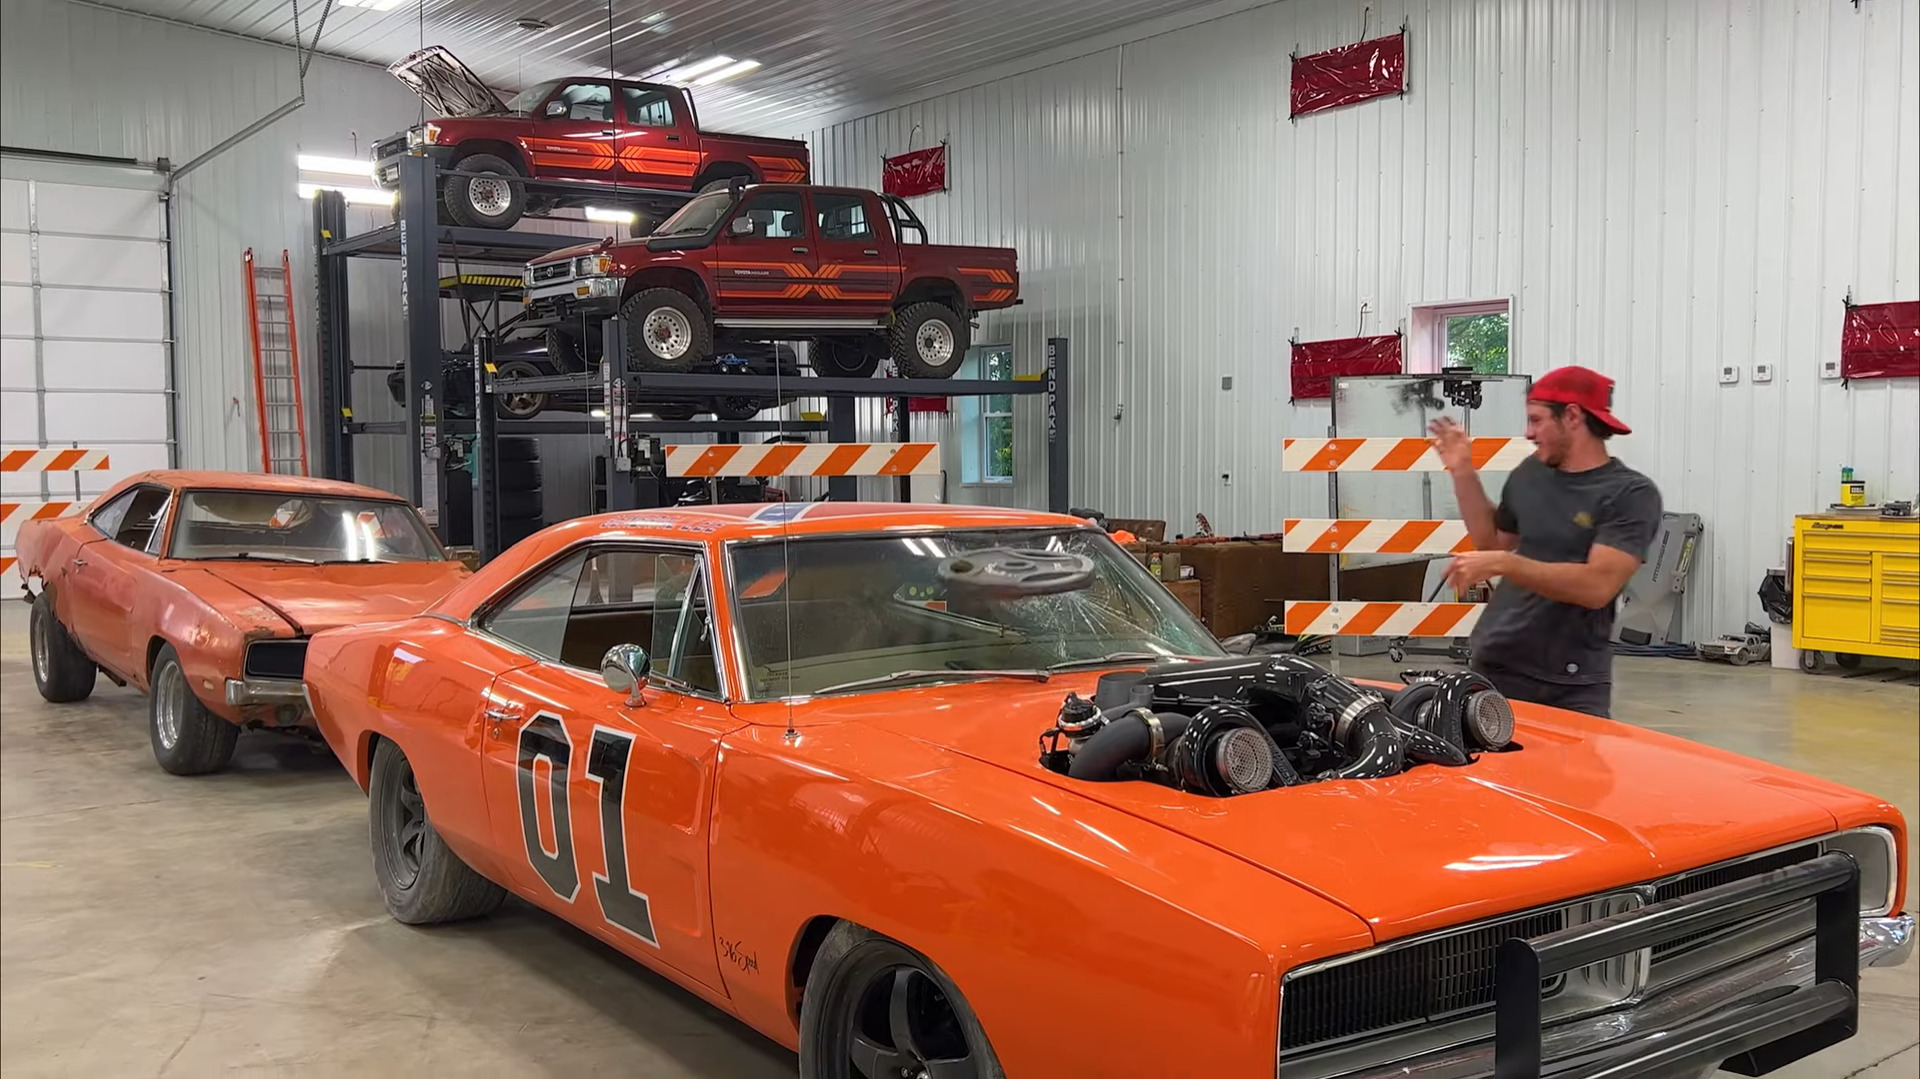 The Worlds Fastest General Lee Can Run From any Cop (1600hp Twin Turbo LS)  